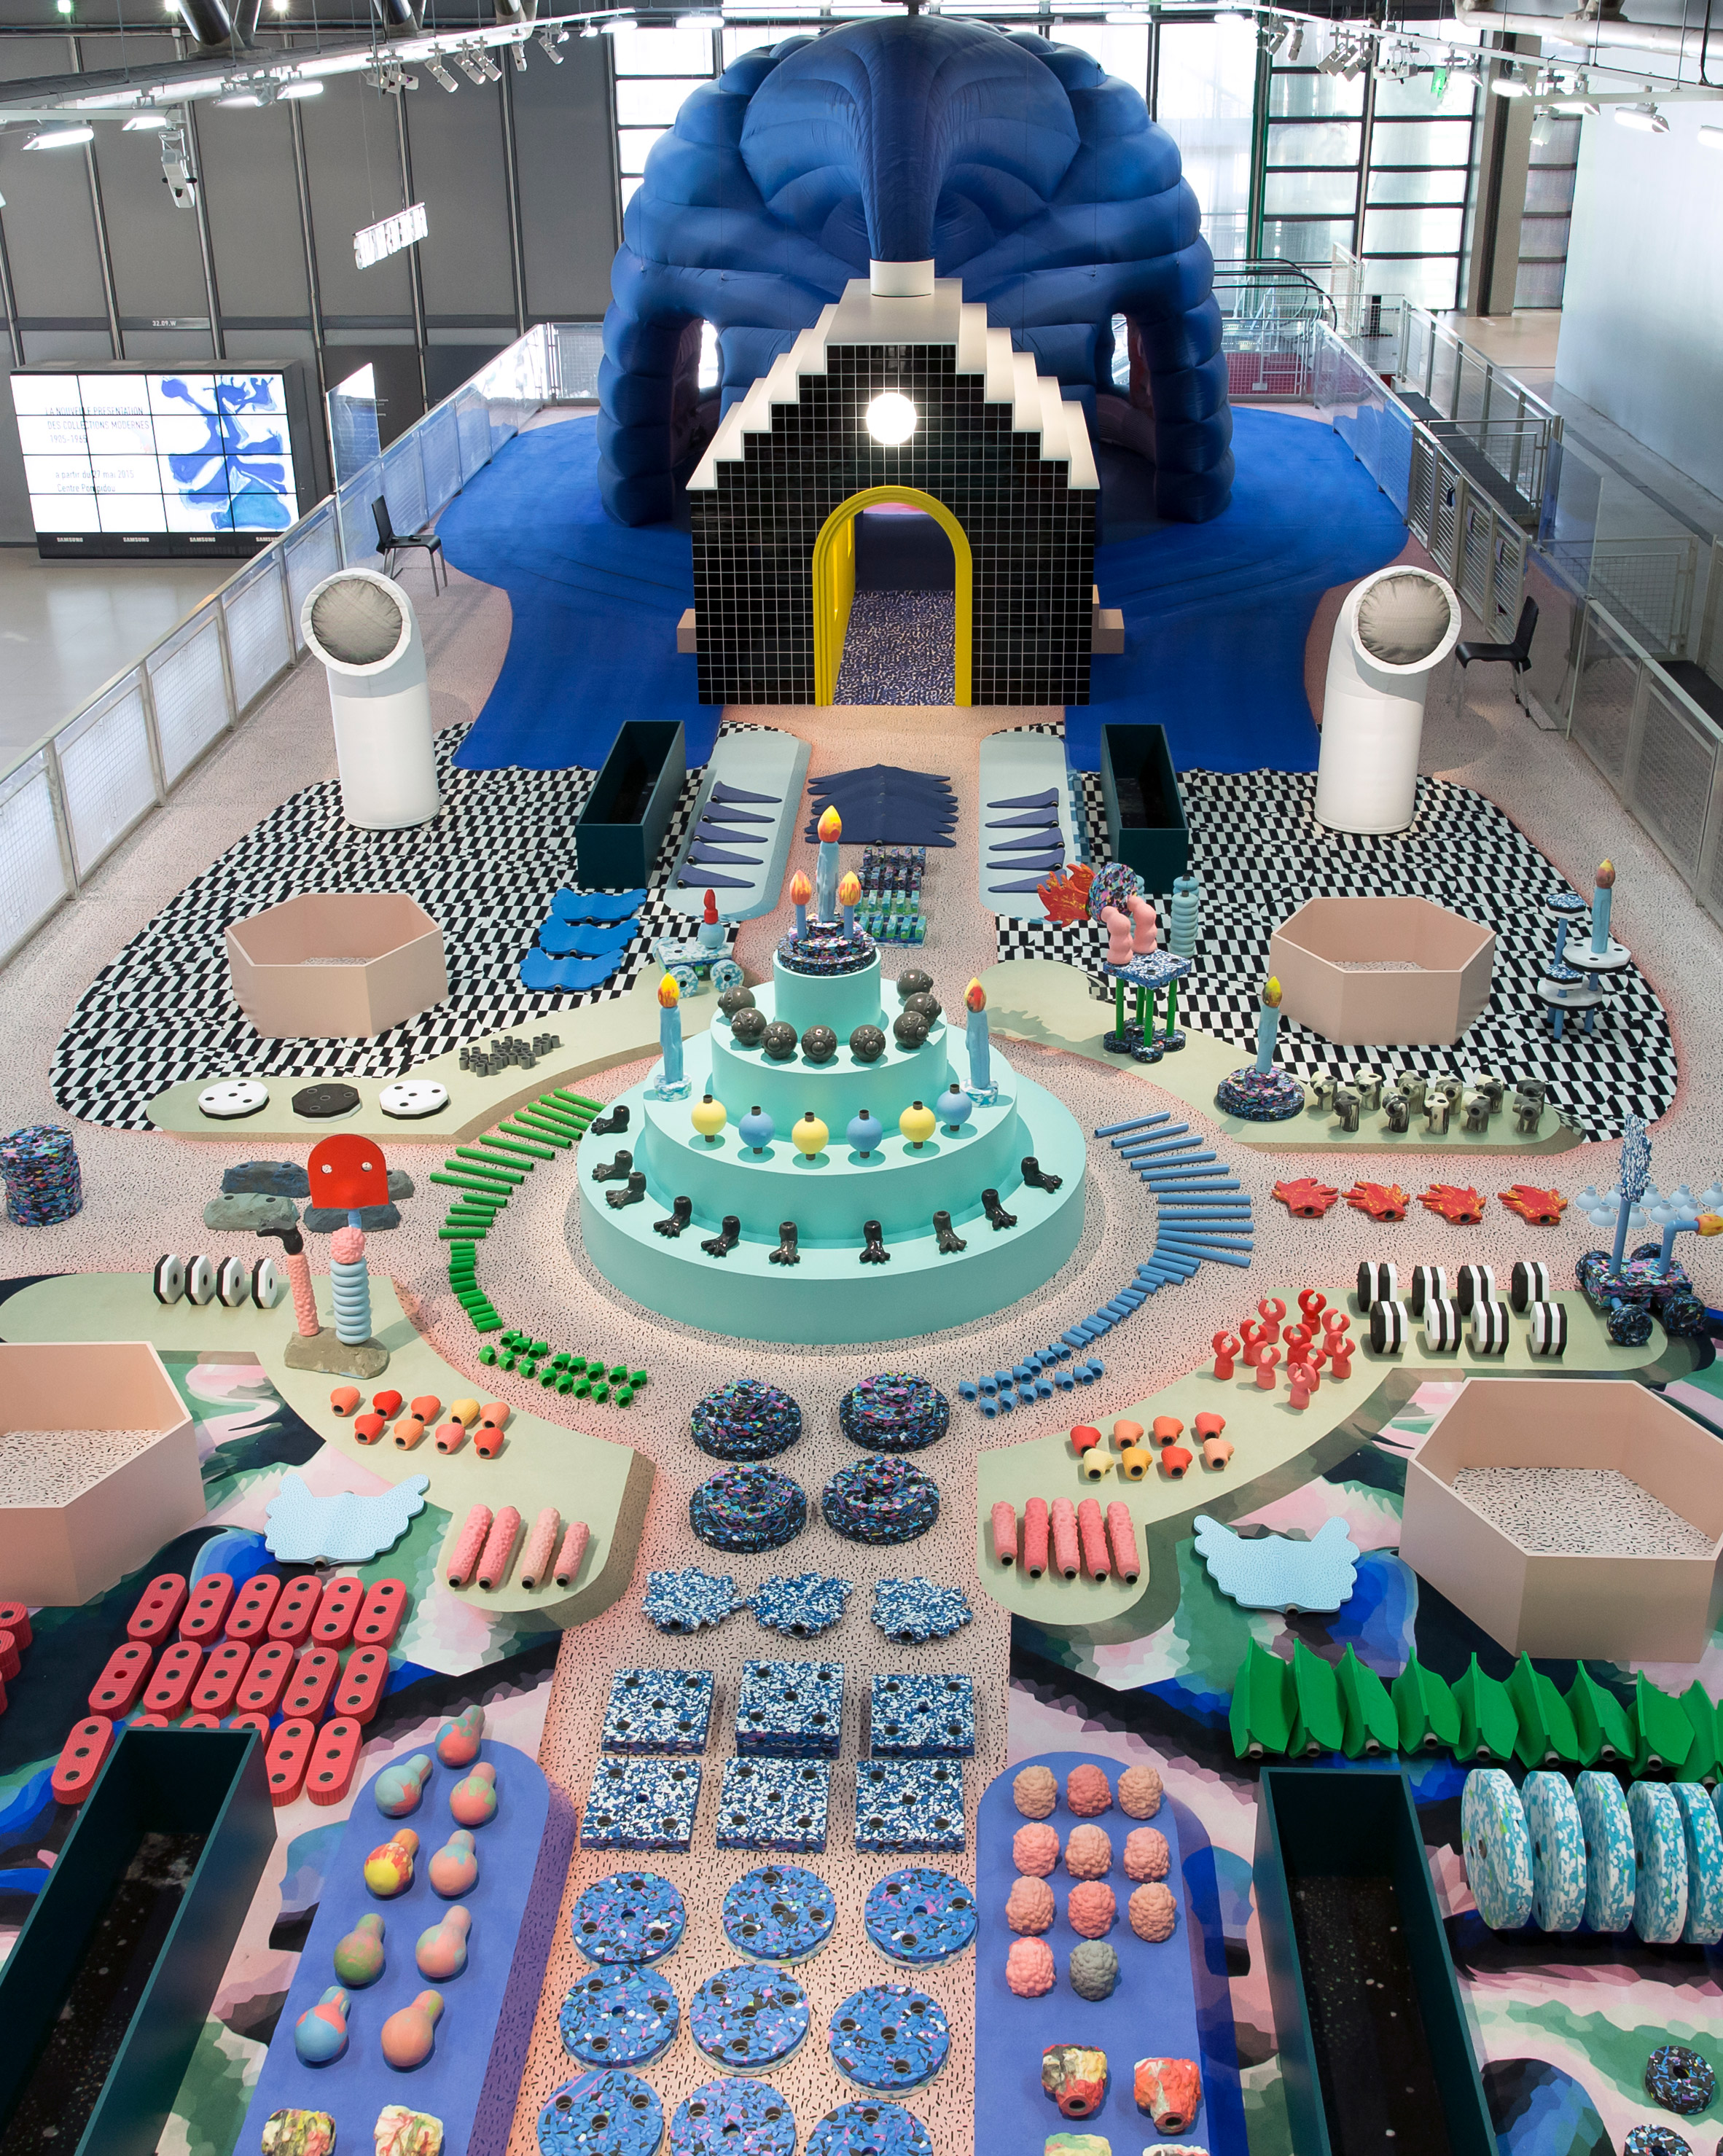 To celebrate the Centre Pompidou's fortieth anniversary, Paris-based studio GGSV have designed an interactive installation for children in the building's Galerie des enfants exhibition space.